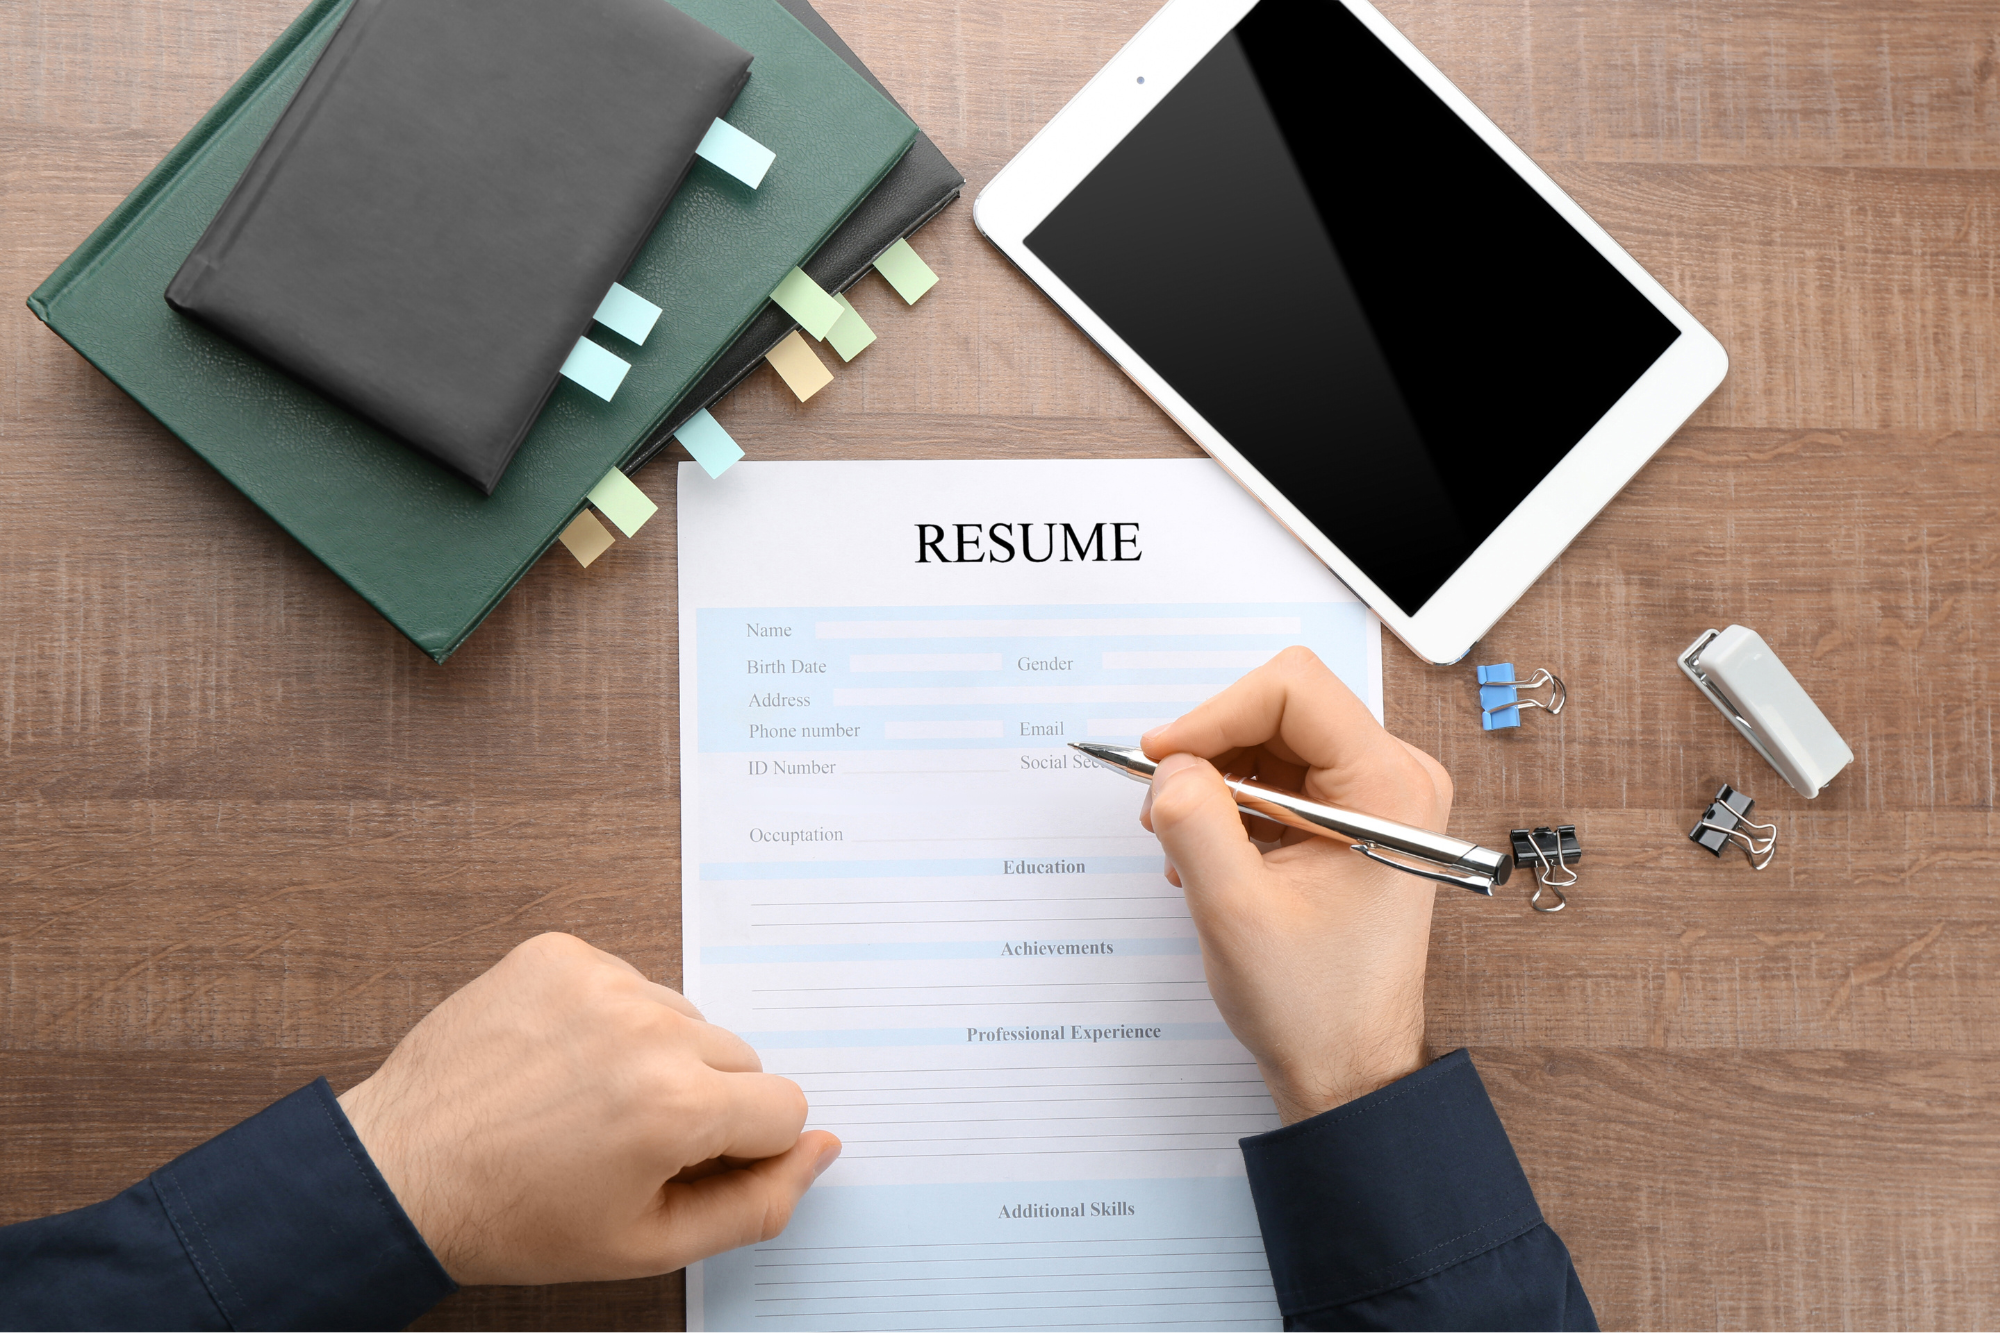 7 Tips for Crafting a Compelling IT Resume